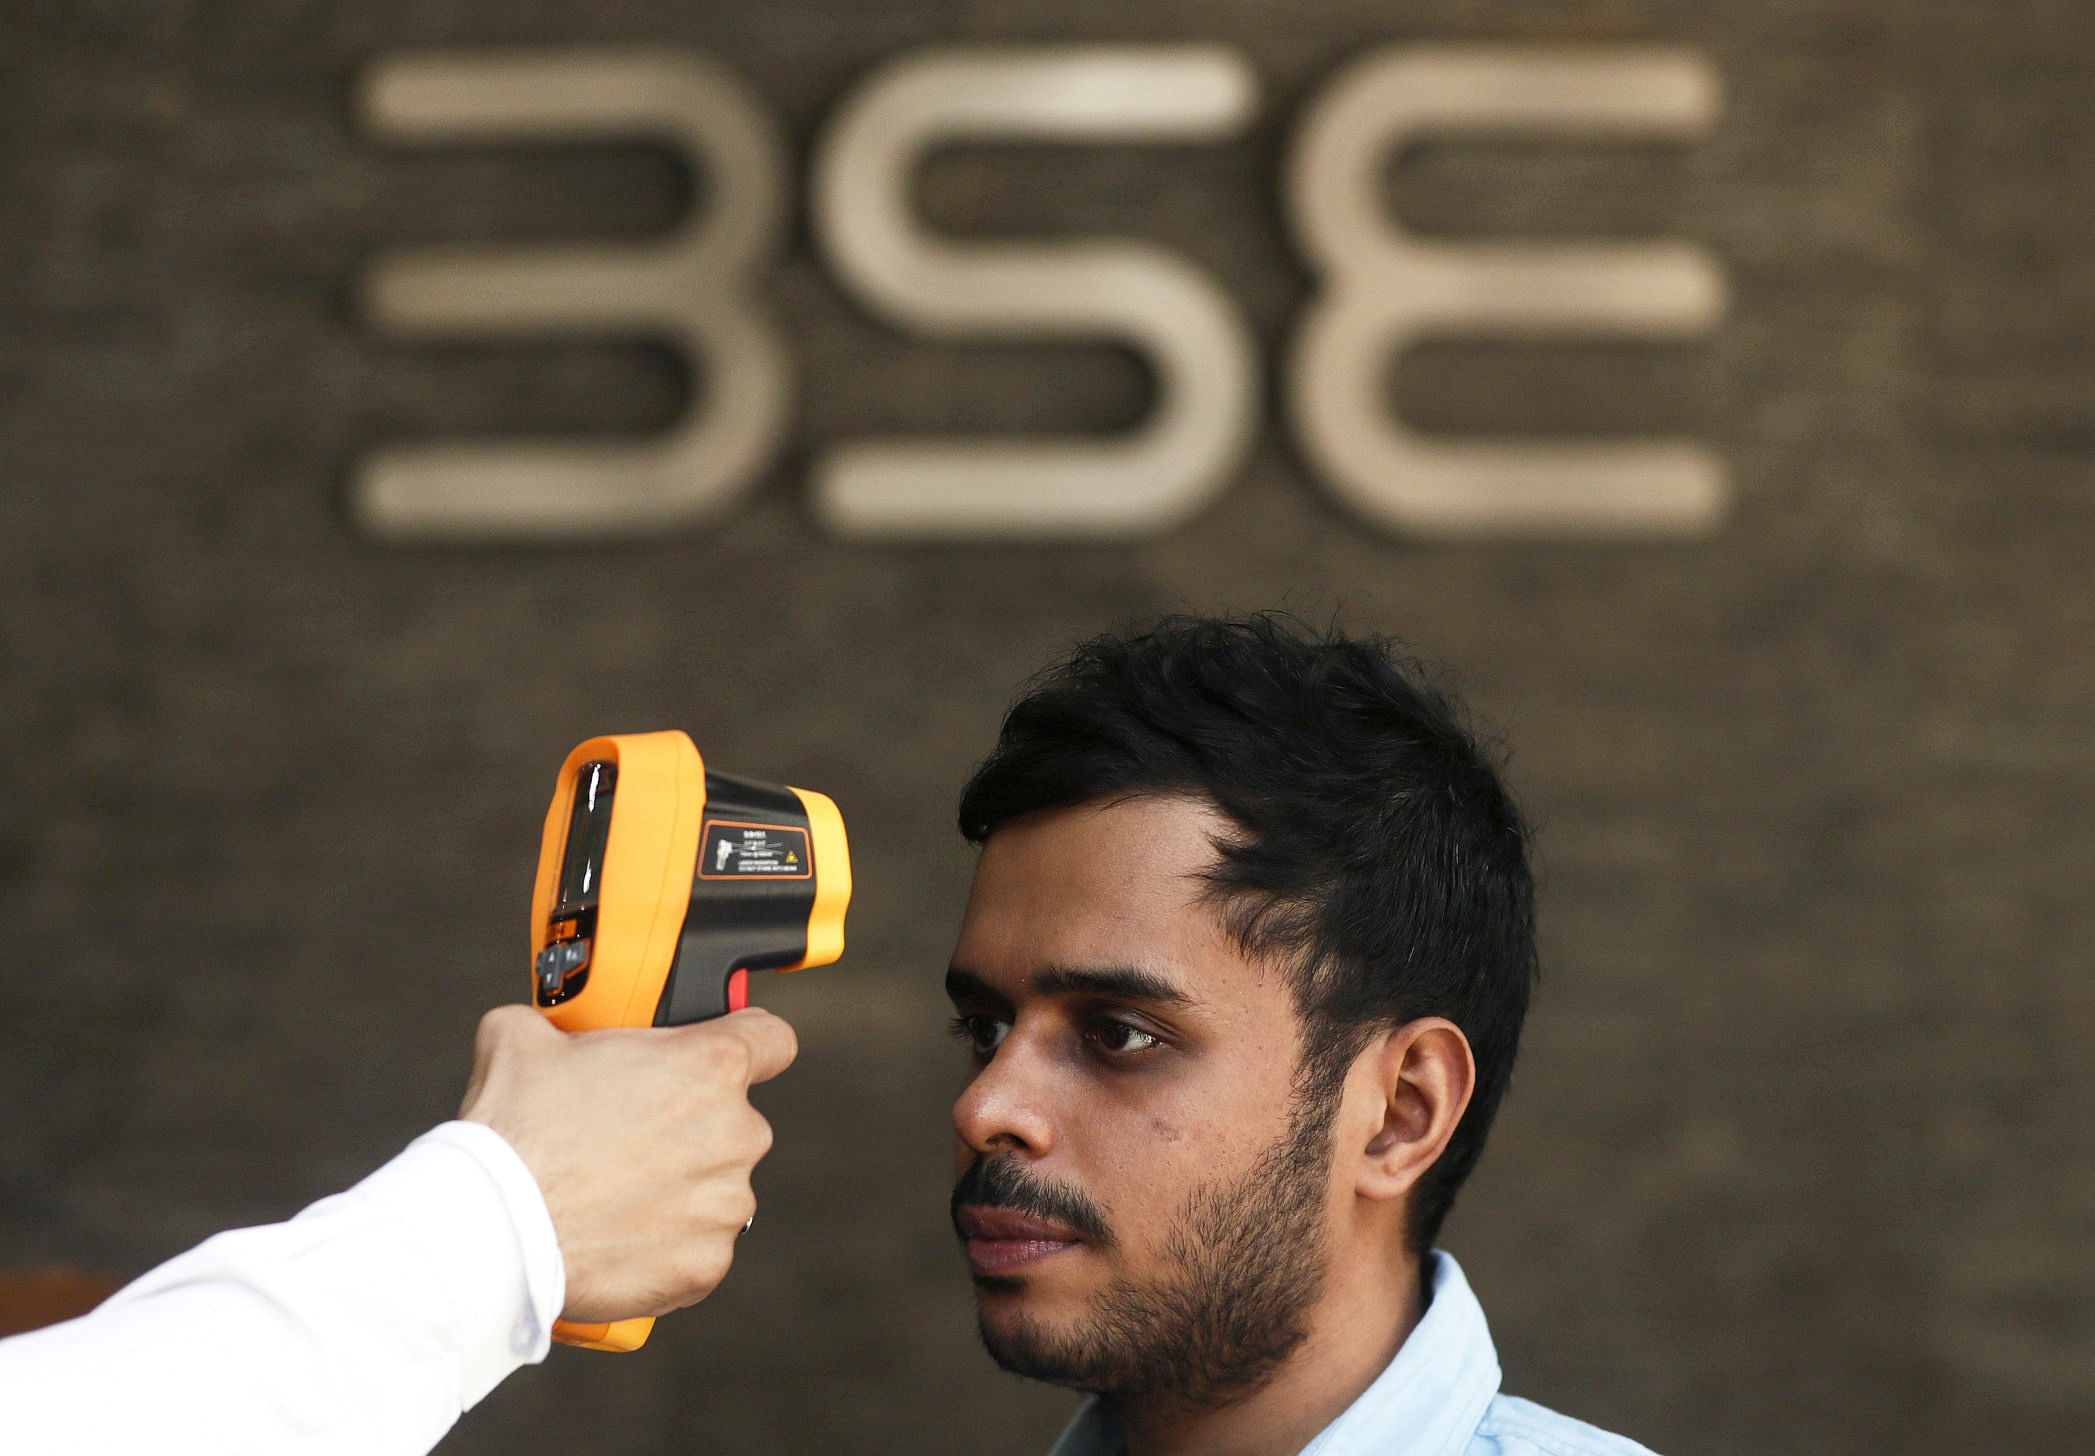 A security official scans a visitor with an infrared thermometer to check his temperature as a precautionary measure against coronavirus outside the Bombay Stock Exchange (BSE). (Reuters Photo)